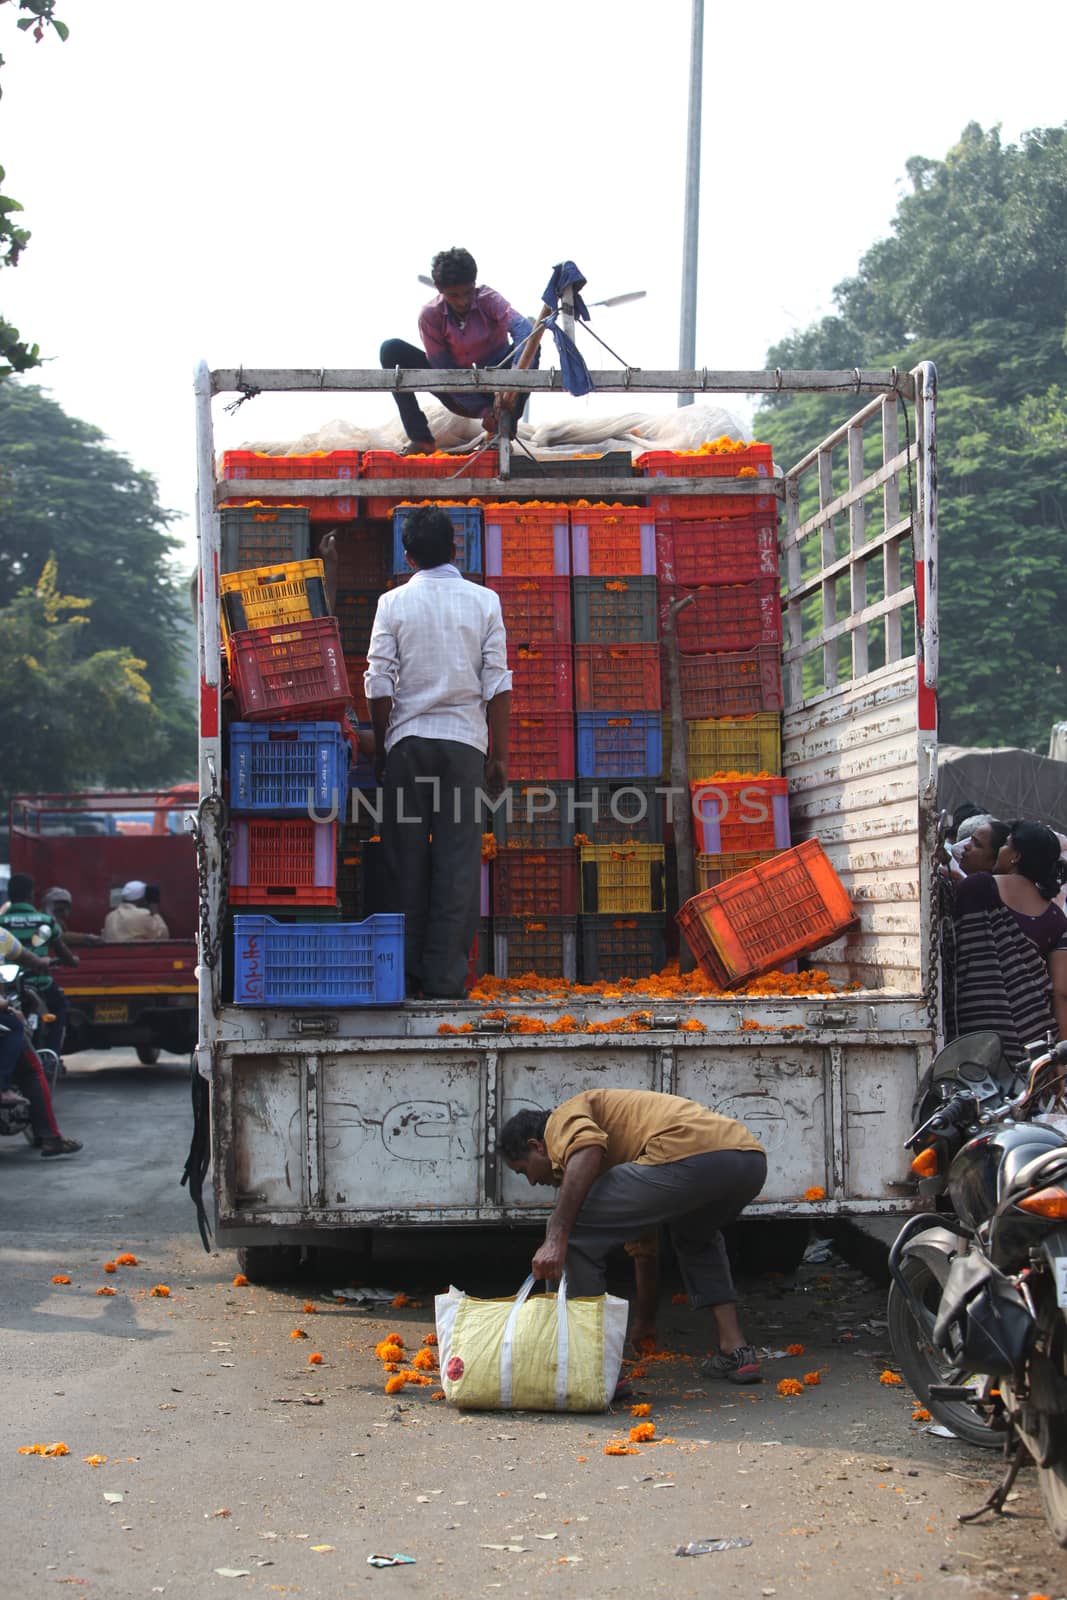 Pune, India - October 21, 2015: Unloading Marigold by thefinalmiracle